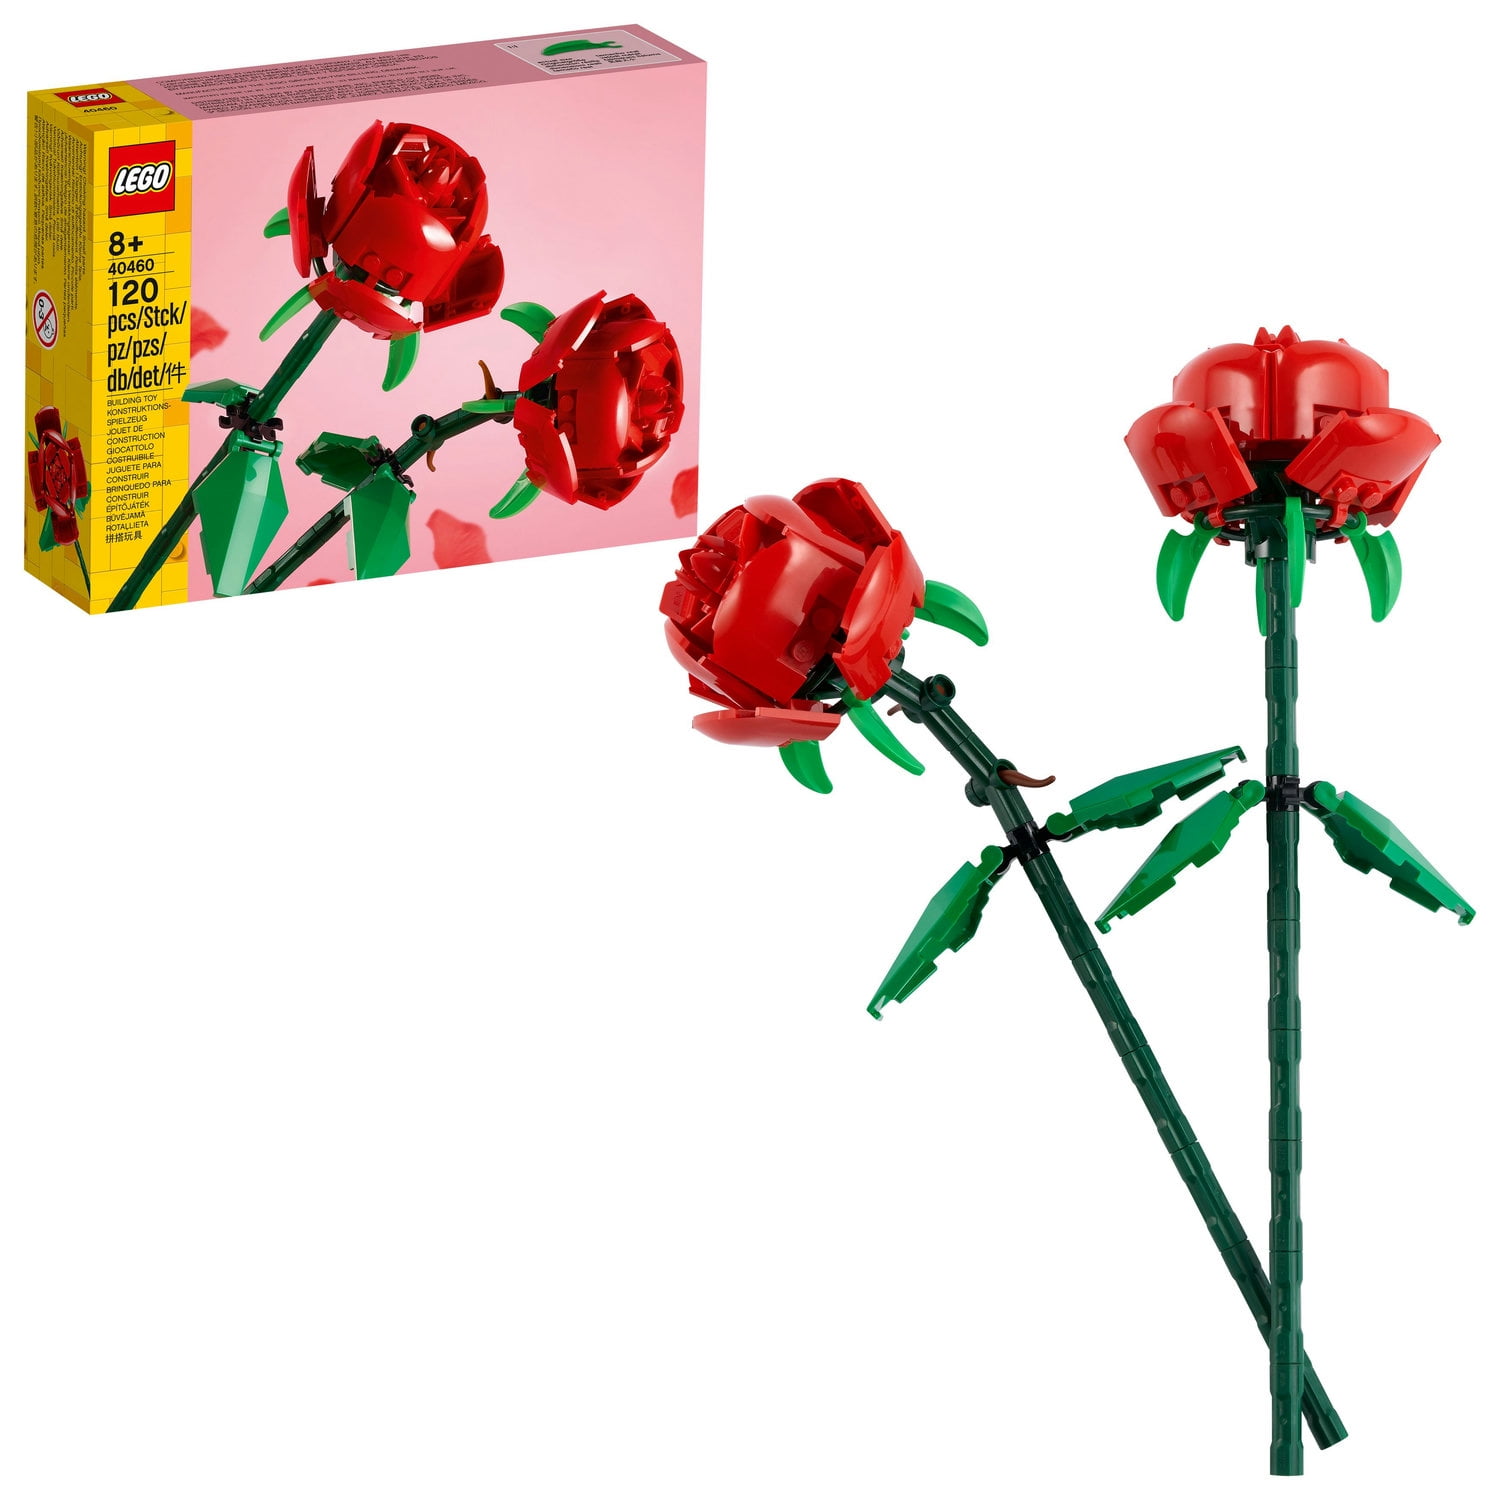 LEGO 40460 - ROSES - BRAND NEW & SEALED - GREAT FOR VALATINES DAY OR  MOTHERS DAY 673419337977 on eBid United States